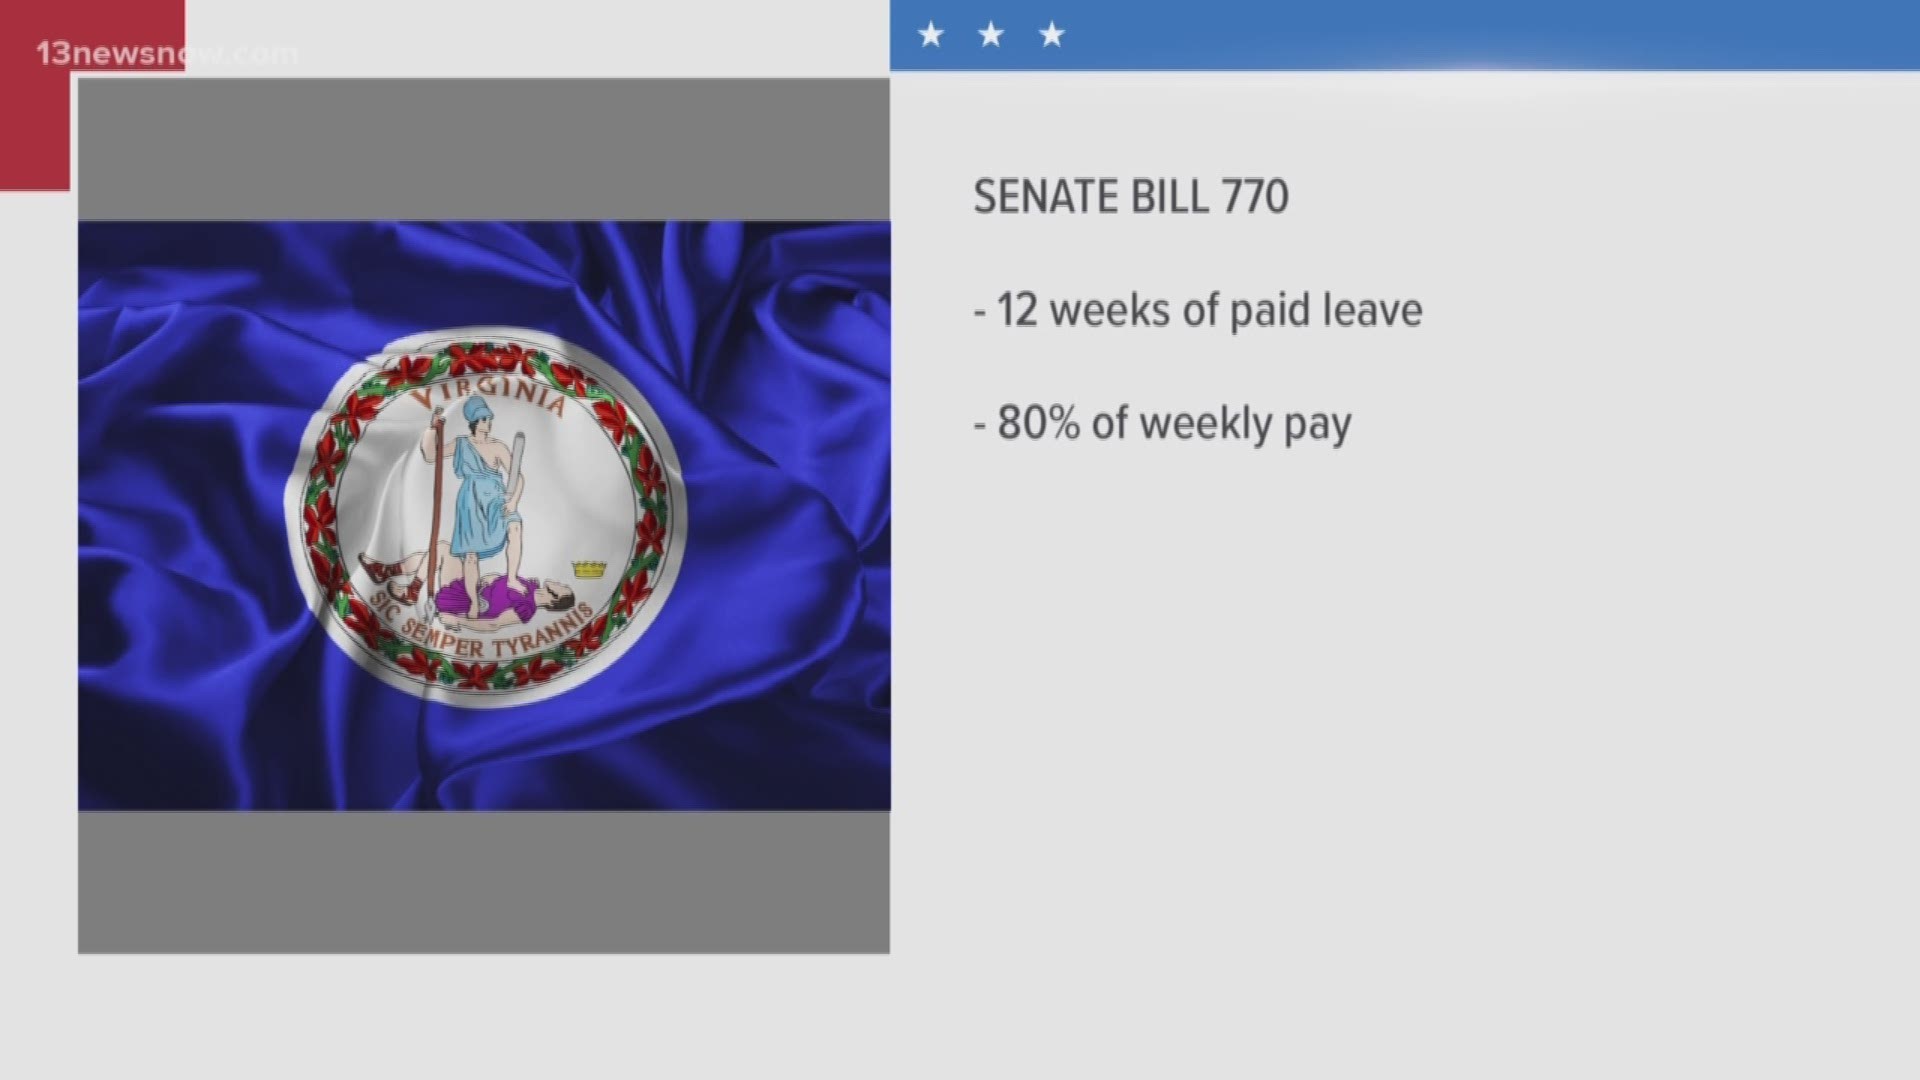 13News Now Angelo Vargas has more on a bill that would make 12 weeks of paid leave a reality in Virginia. However, it still has a long way to go in the statehouse.